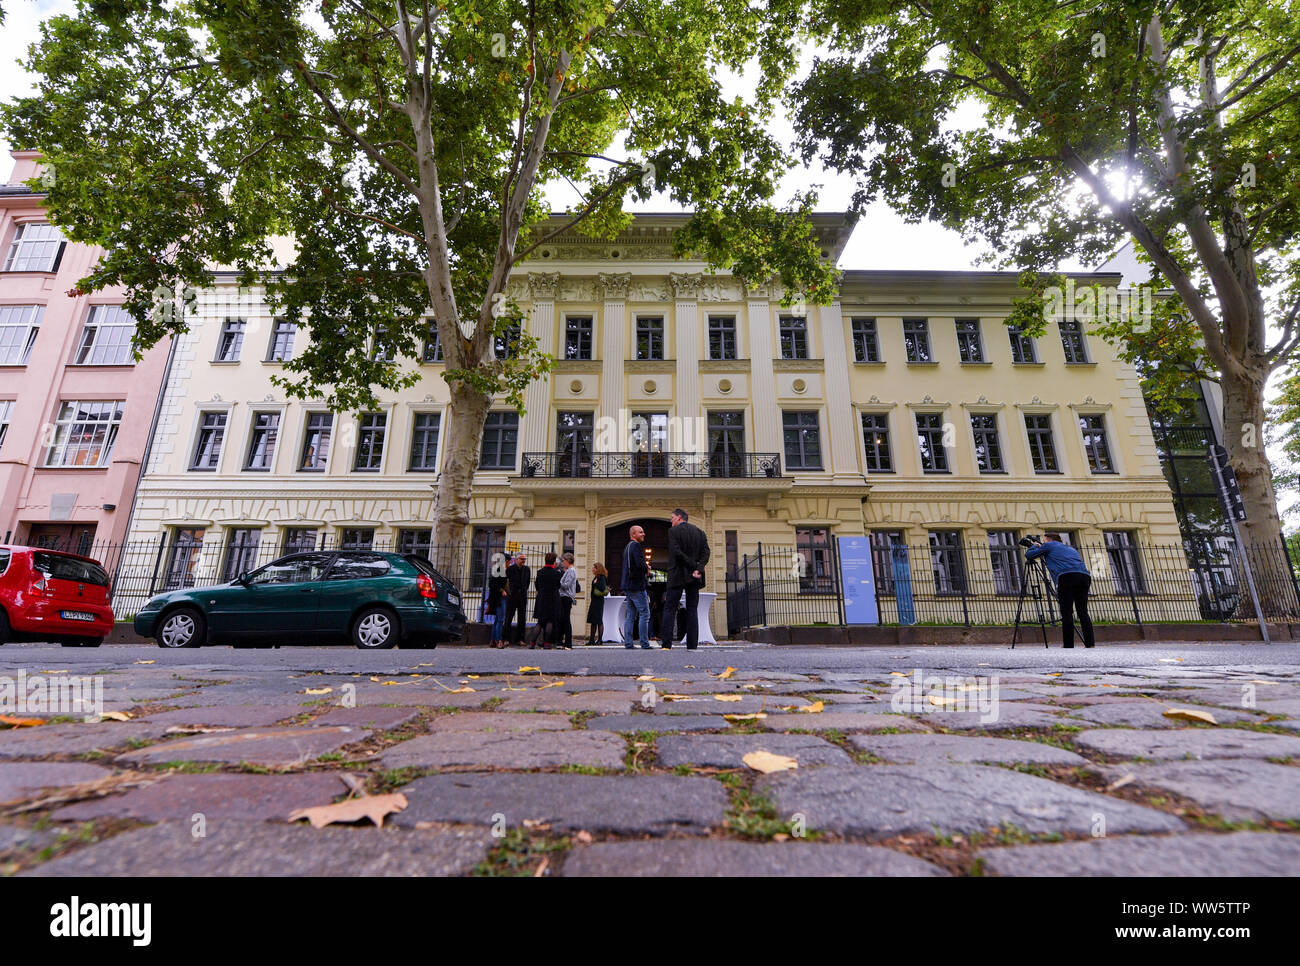 Inselstrasse High Resolution Stock Photography and Images - Alamy